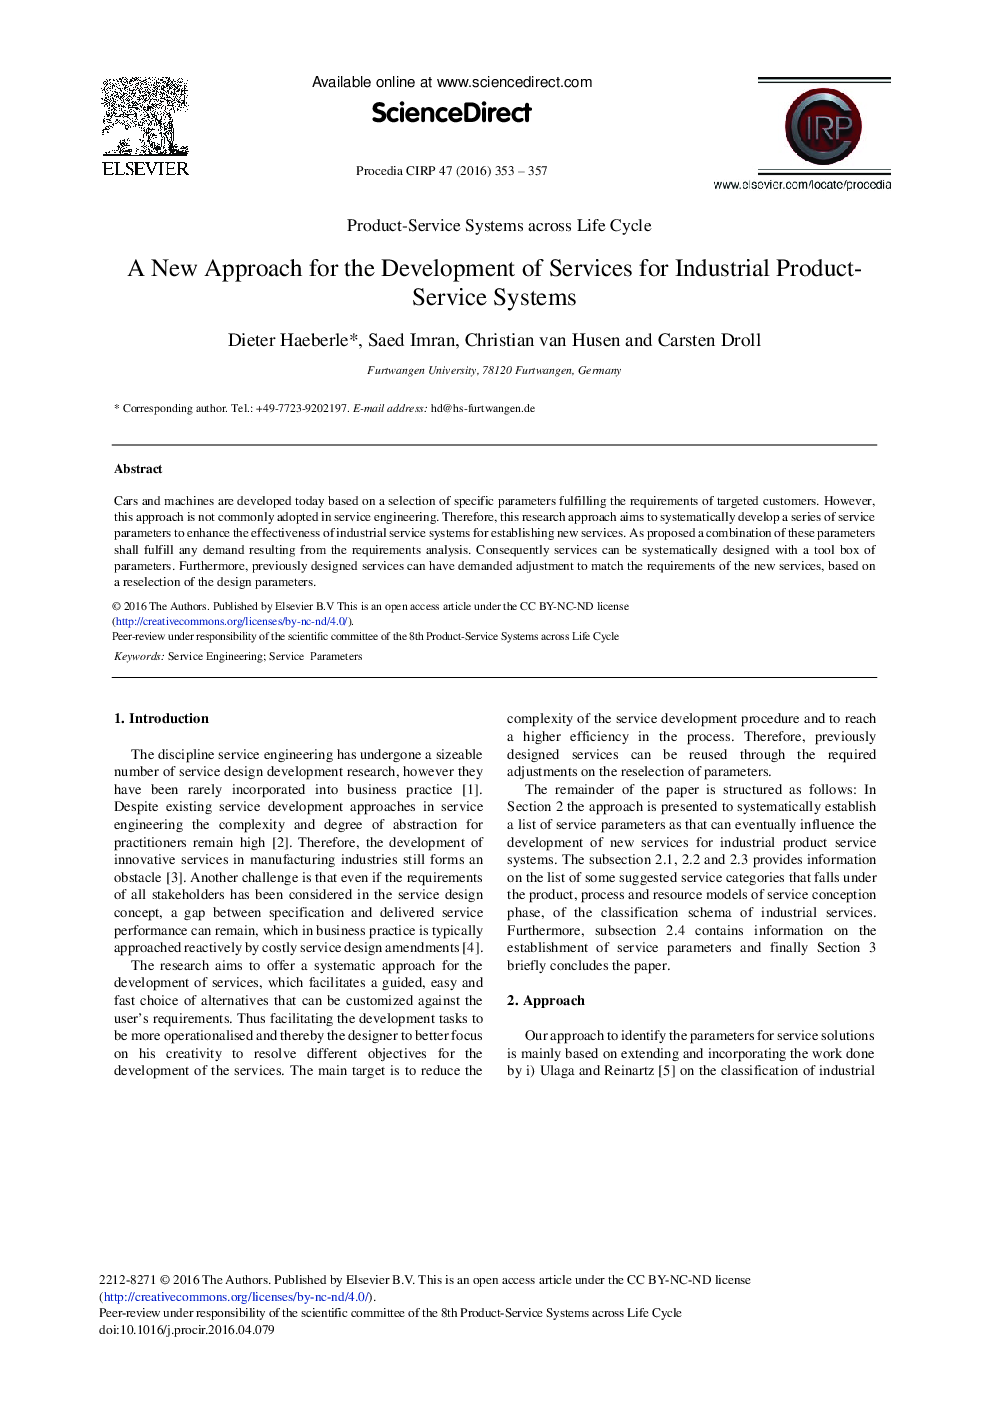 A New Approach for the Development of Services for Industrial Product-Service Systems 